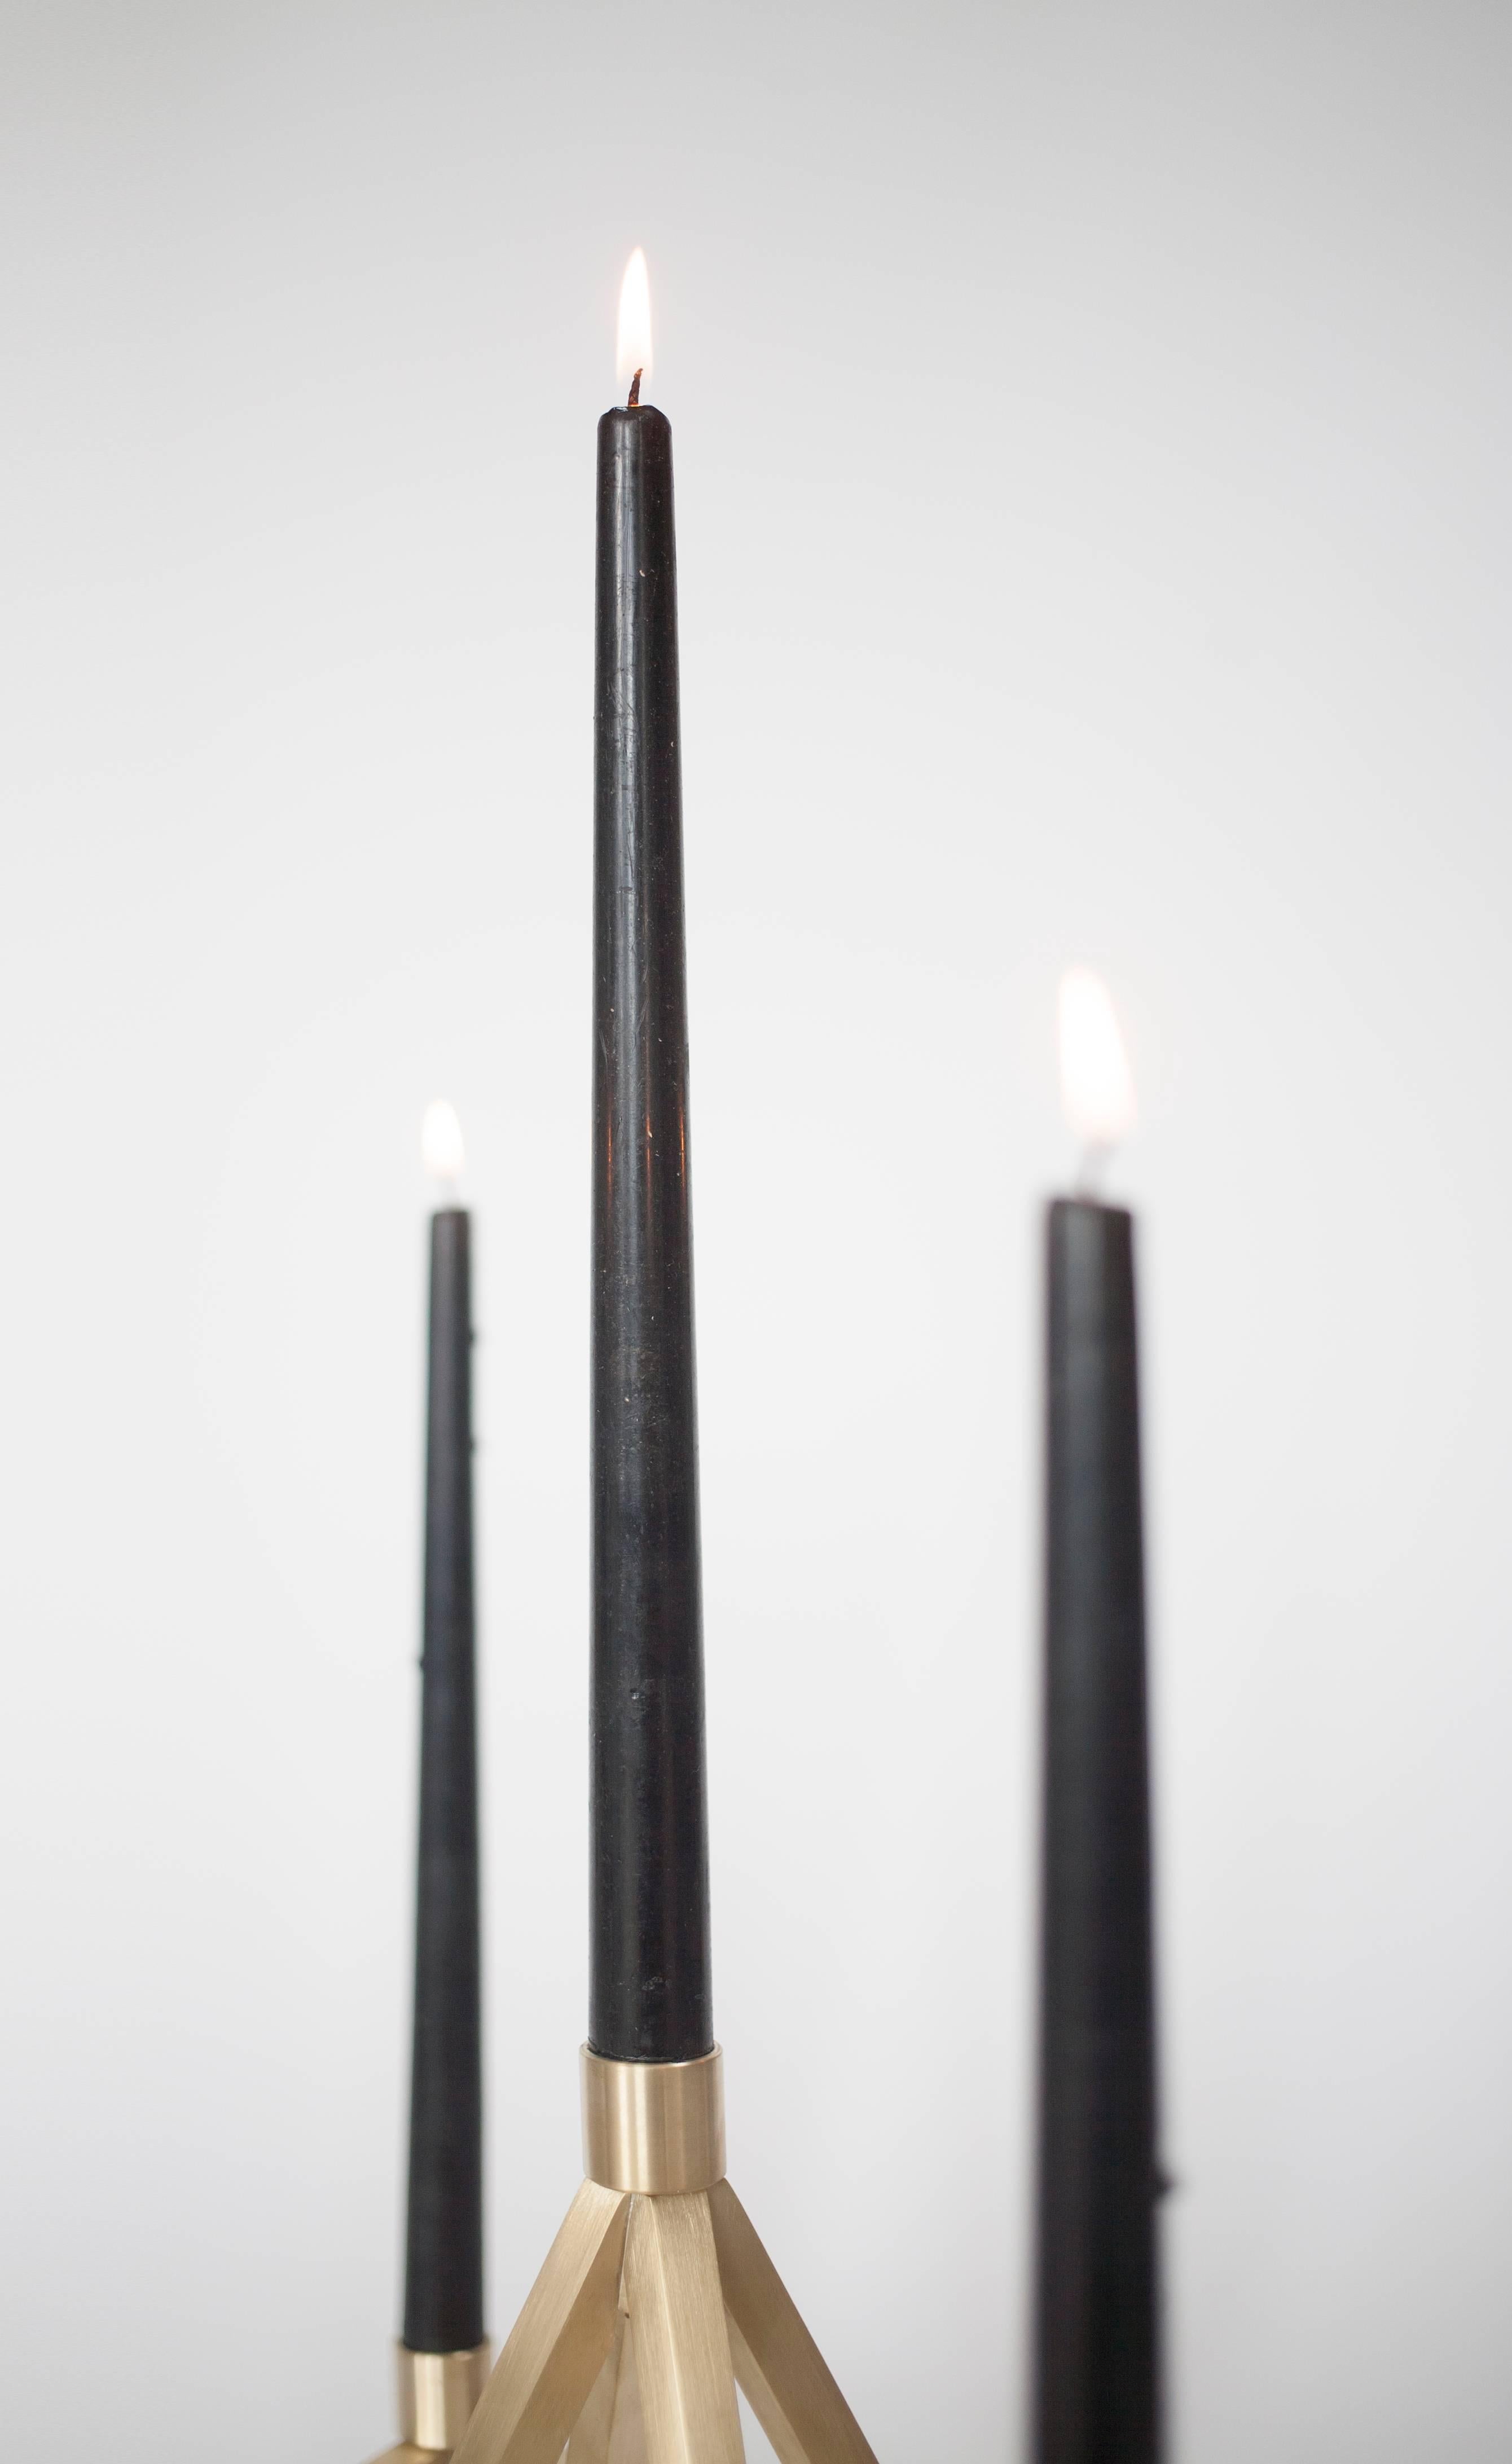 Steel Contemporary 'Pagan' Star Candelabra by Material Lust, 2016 For Sale